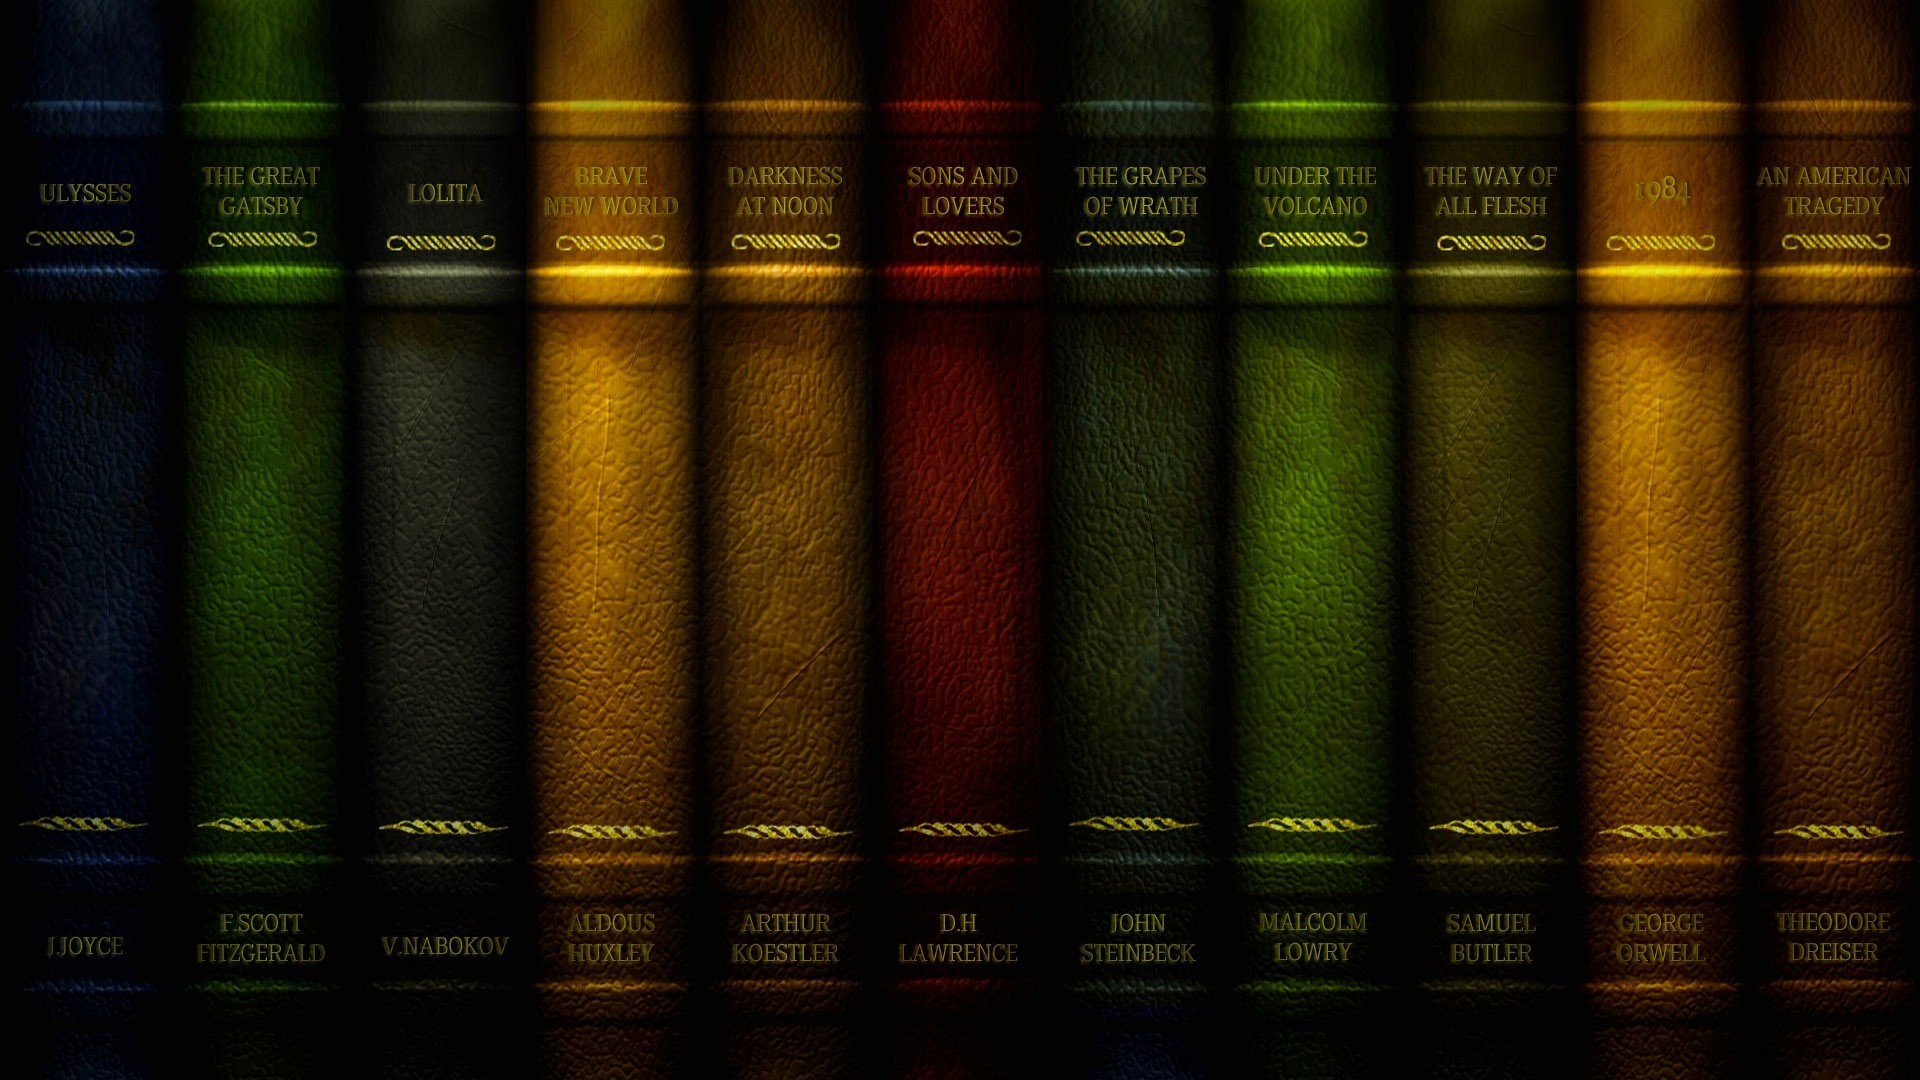 Book Wallpaper Hd 61 Images HD Wallpapers Download Free Images Wallpaper [wallpaper981.blogspot.com]